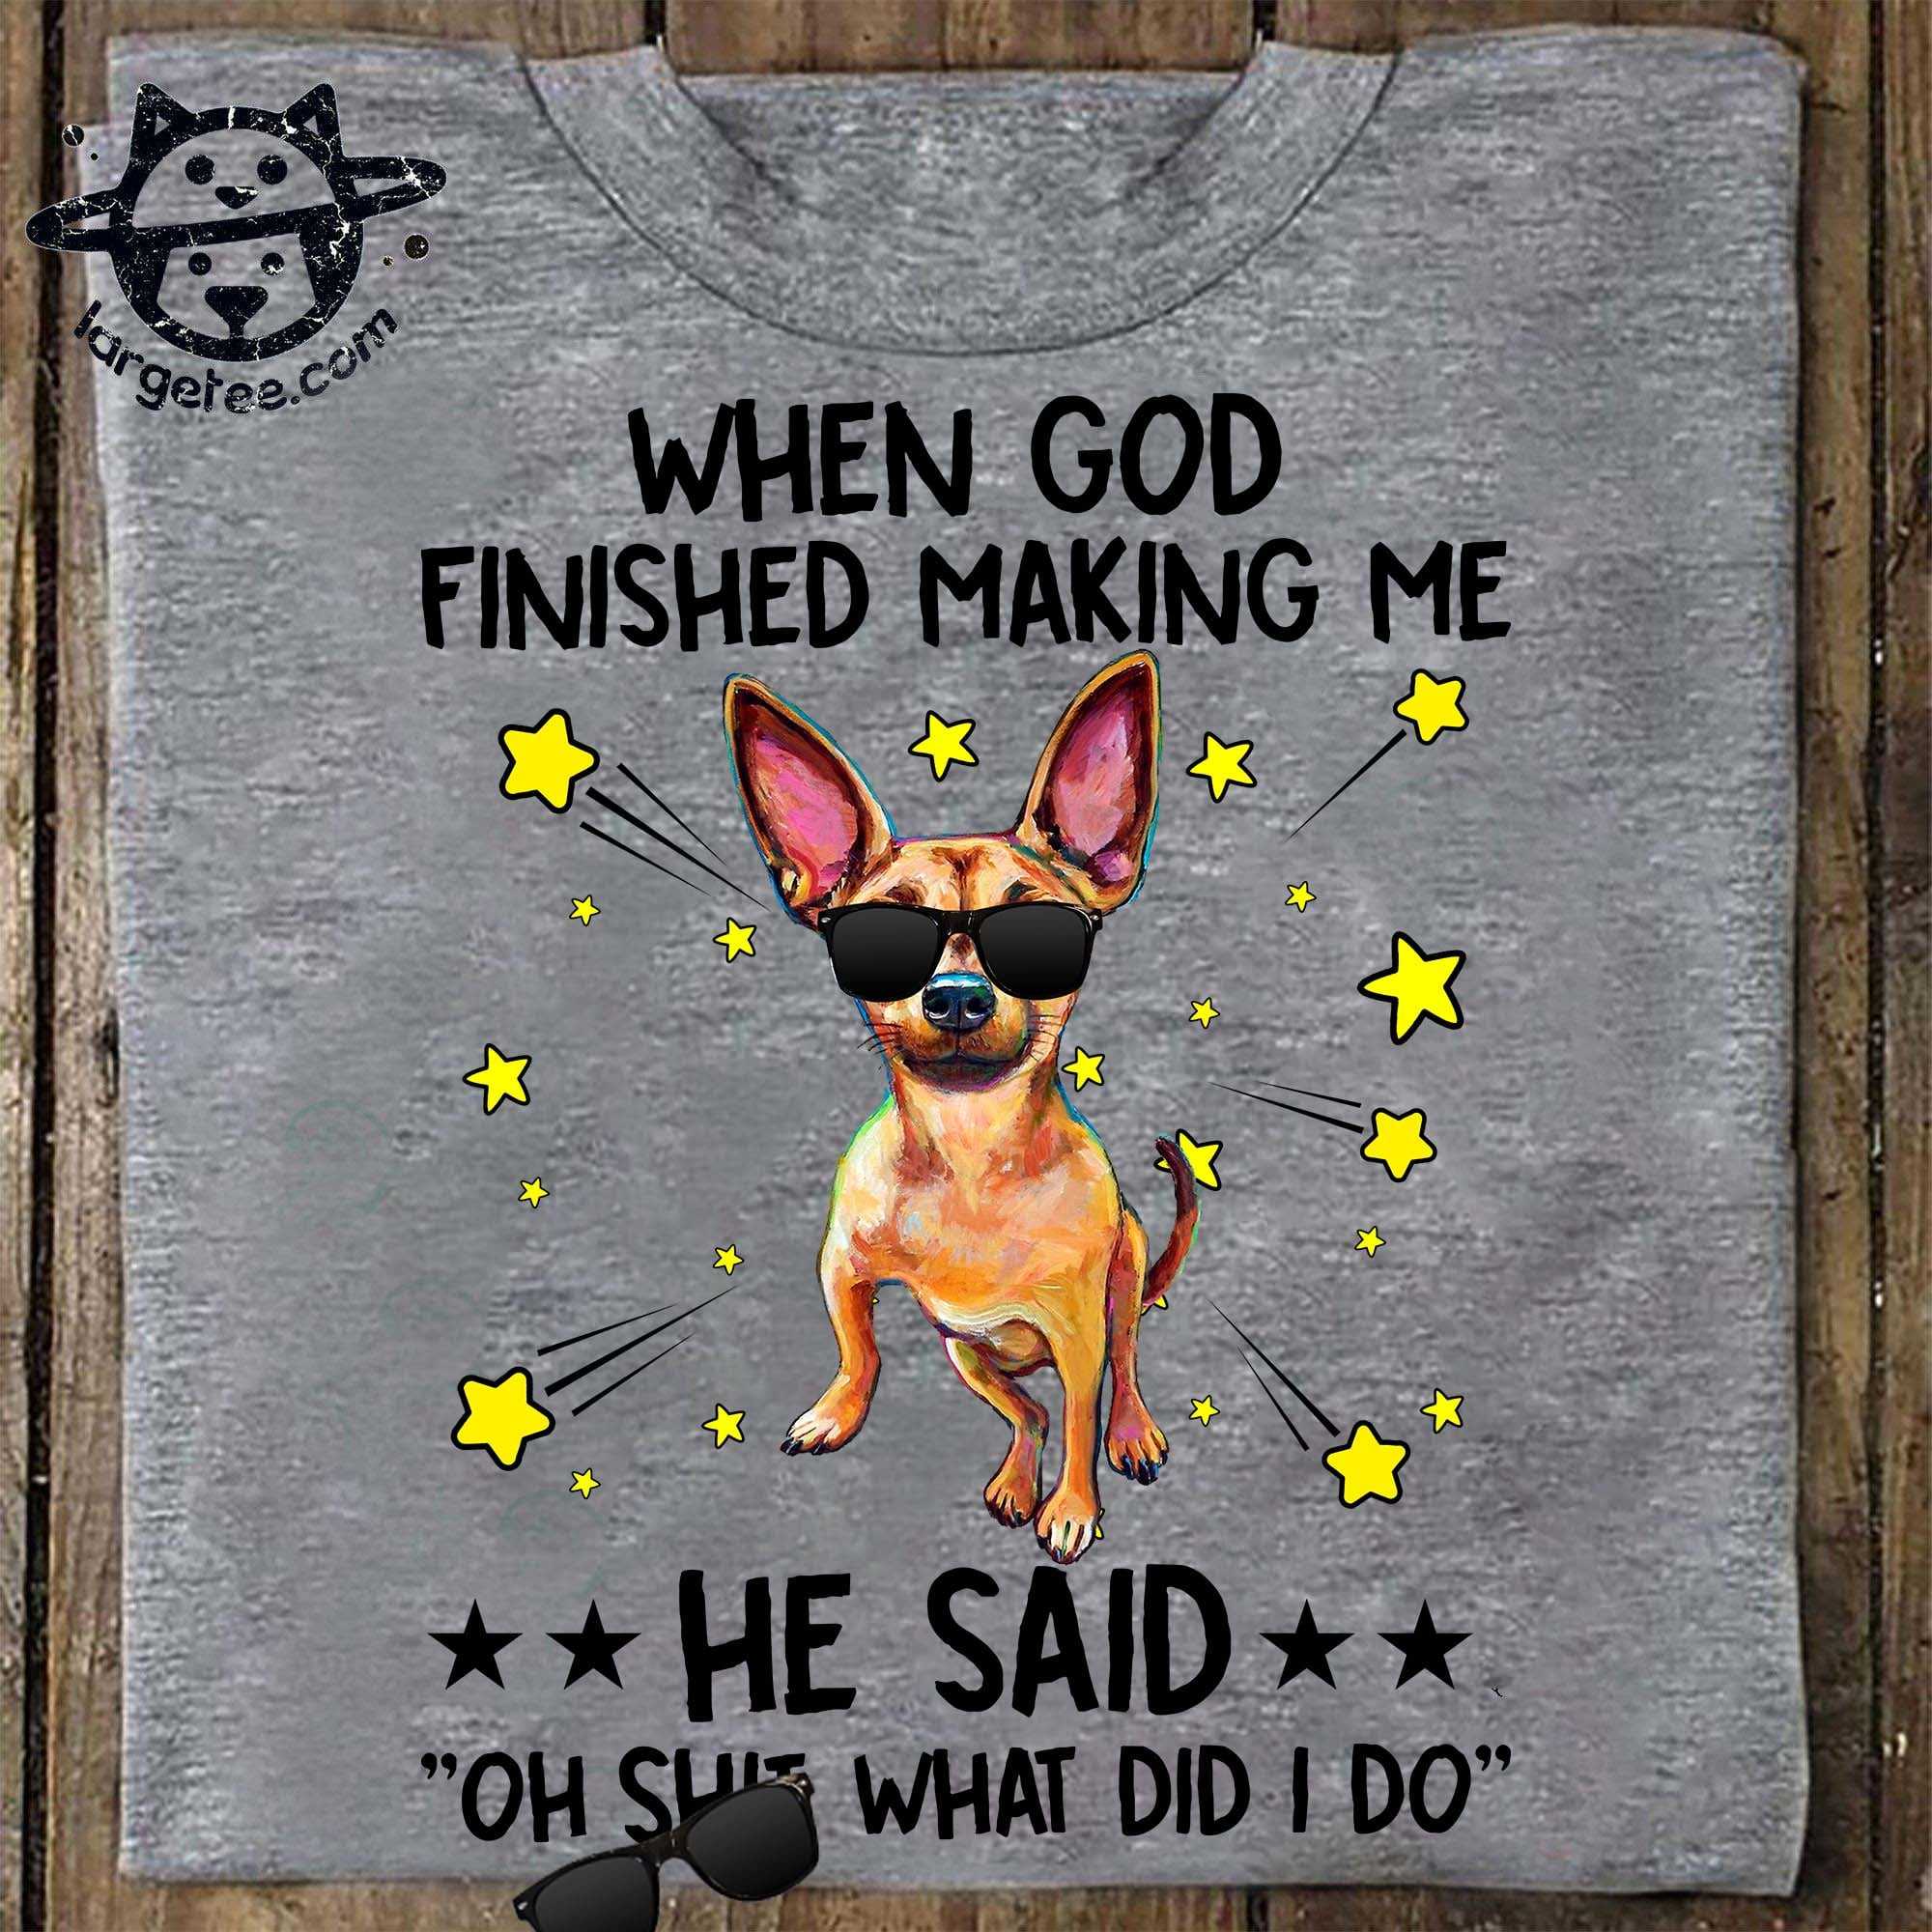 When god finished making me he said ''Oh shit, what did I do'' - Chihuahua dog